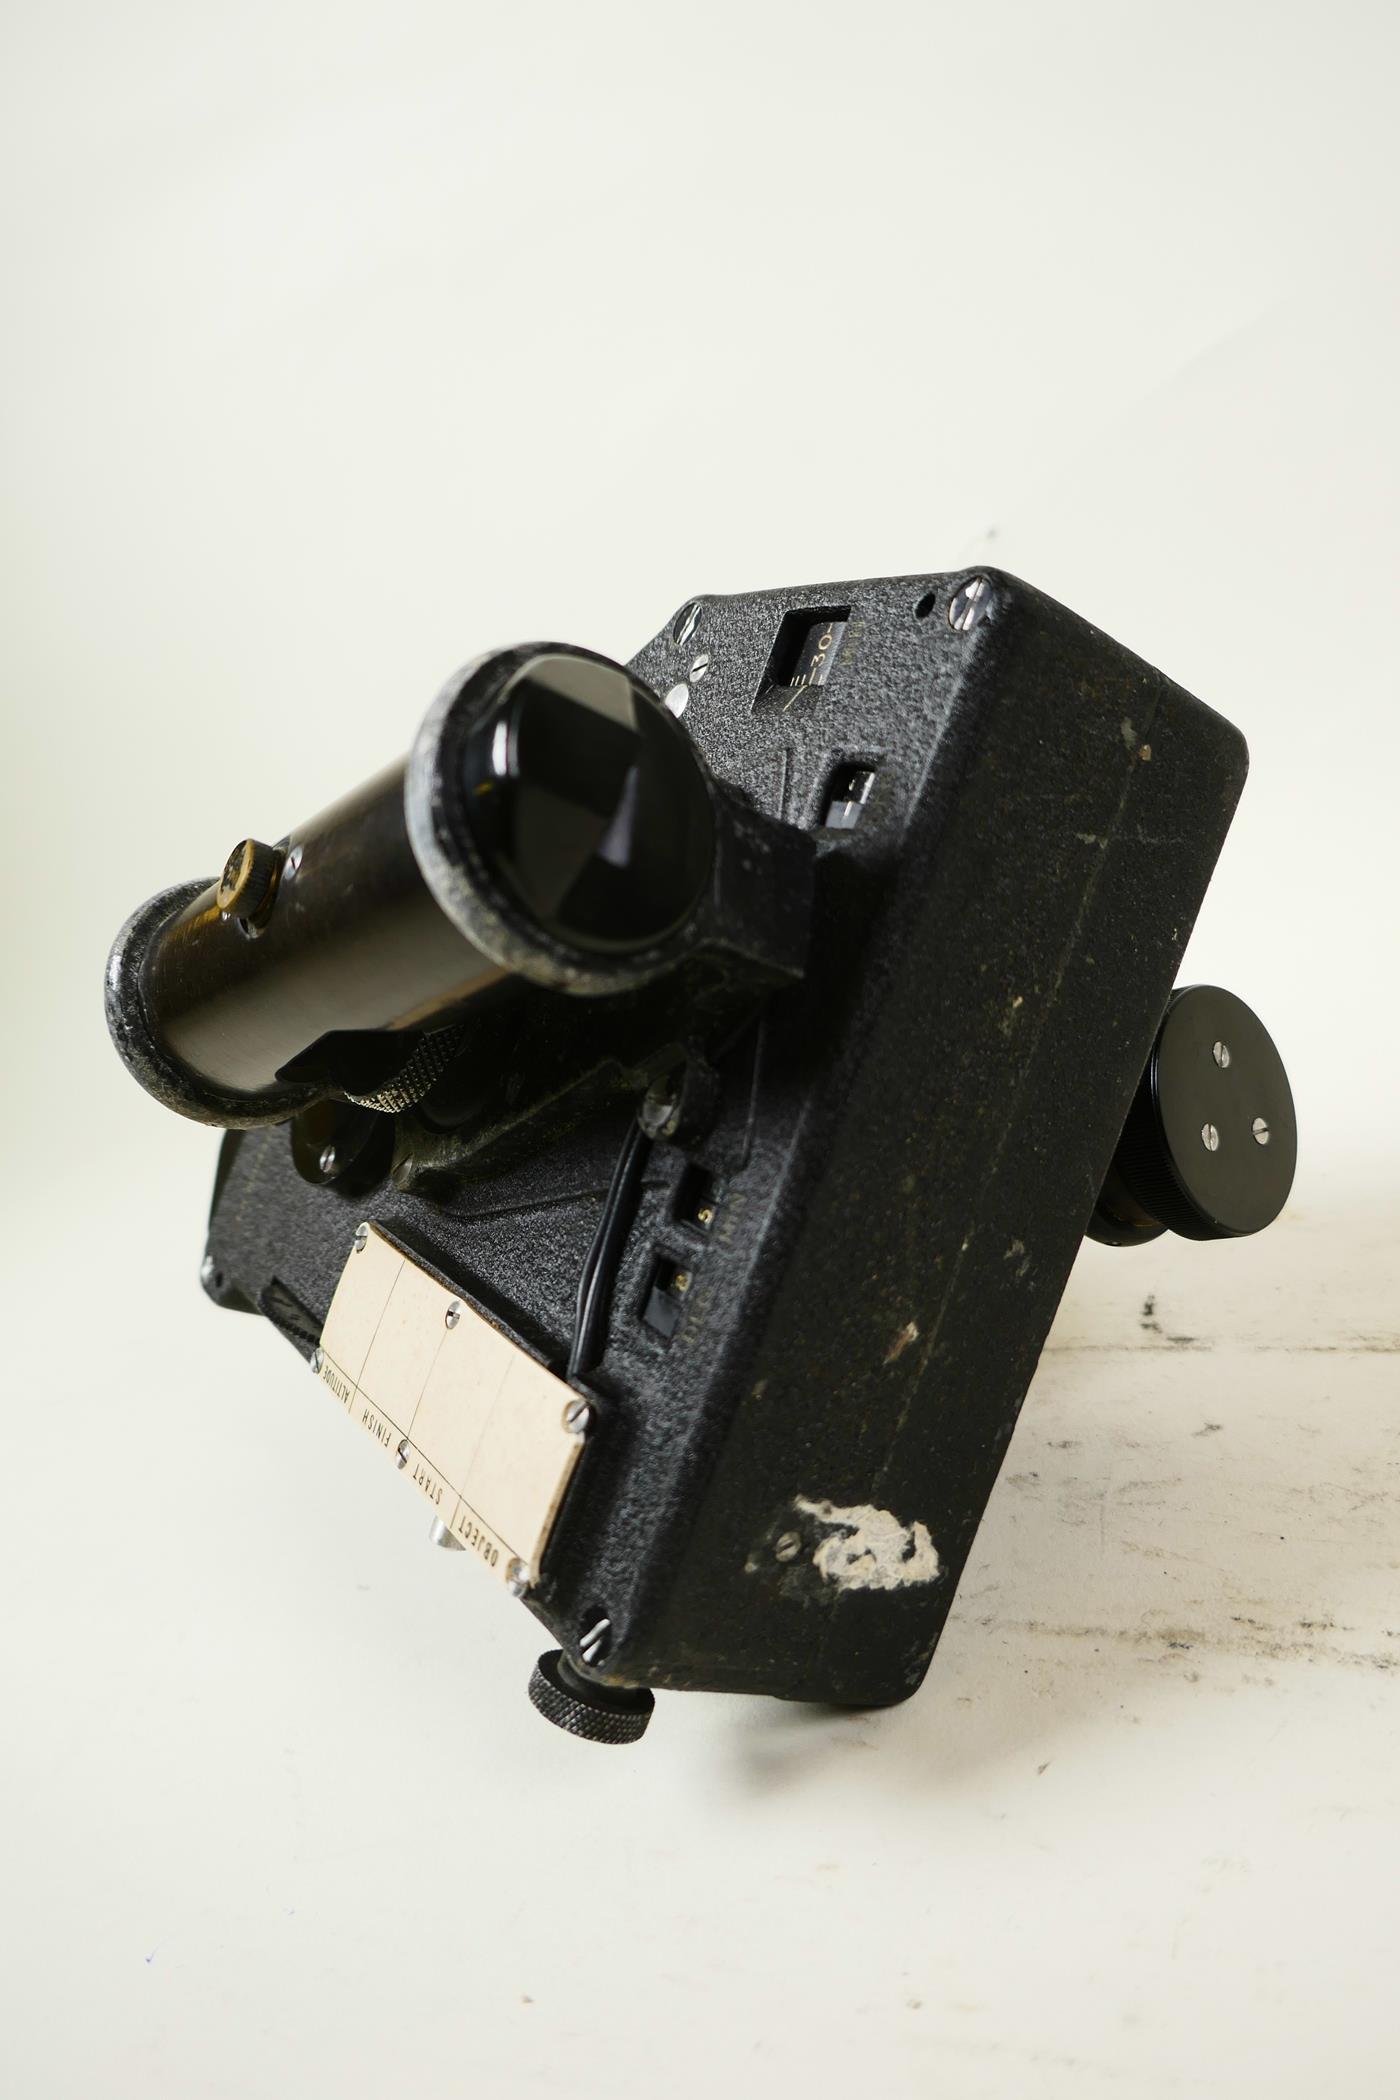 A WWII military aircraft bubble sextant mark 1x by S.S.&S. Ltd, London, ref no. 6B/151, serial no, - Image 6 of 7